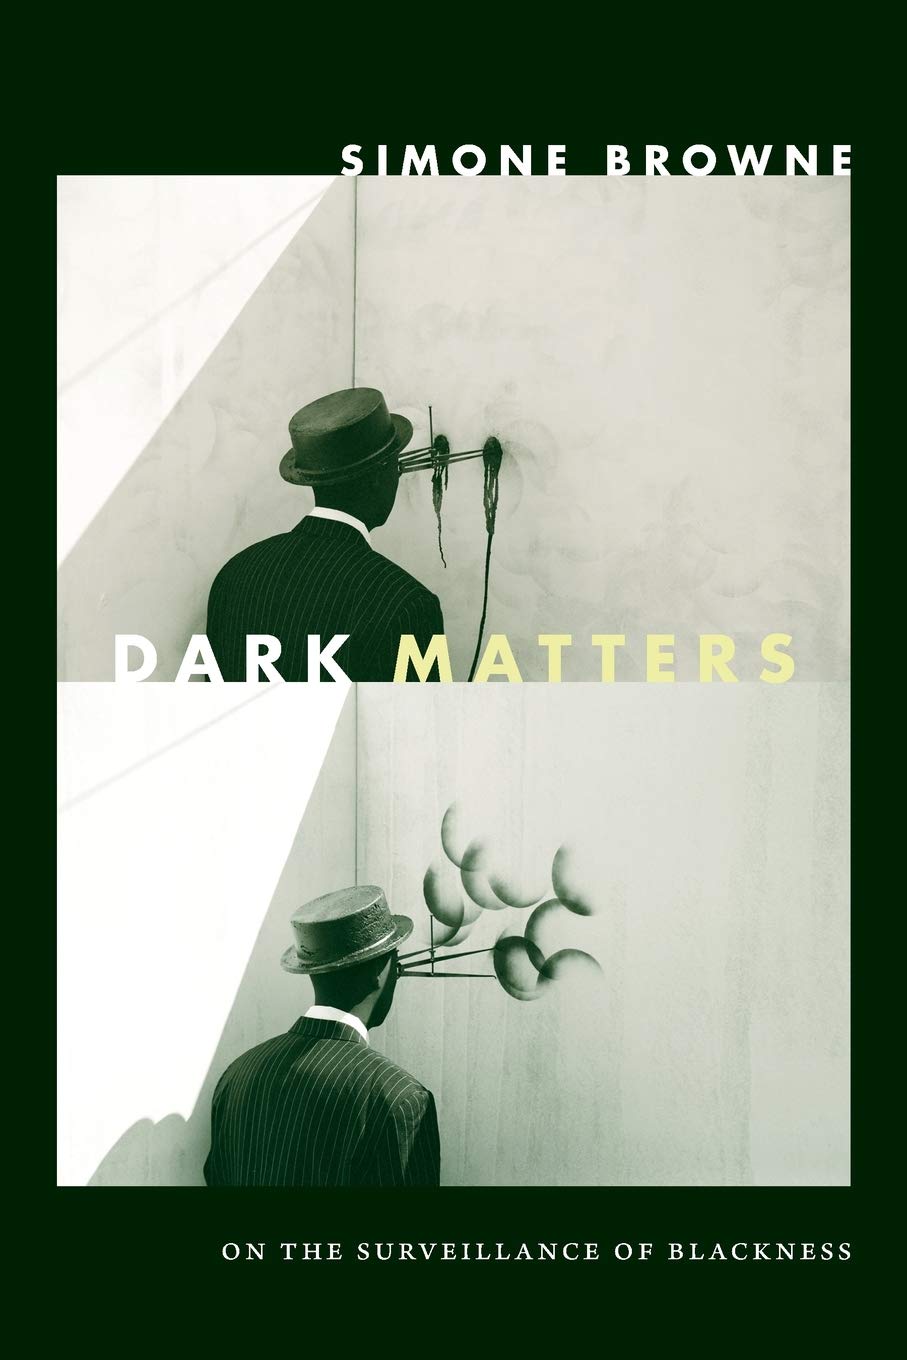 Dark Matters: On the Surveillance of Blackness by Simone Browne